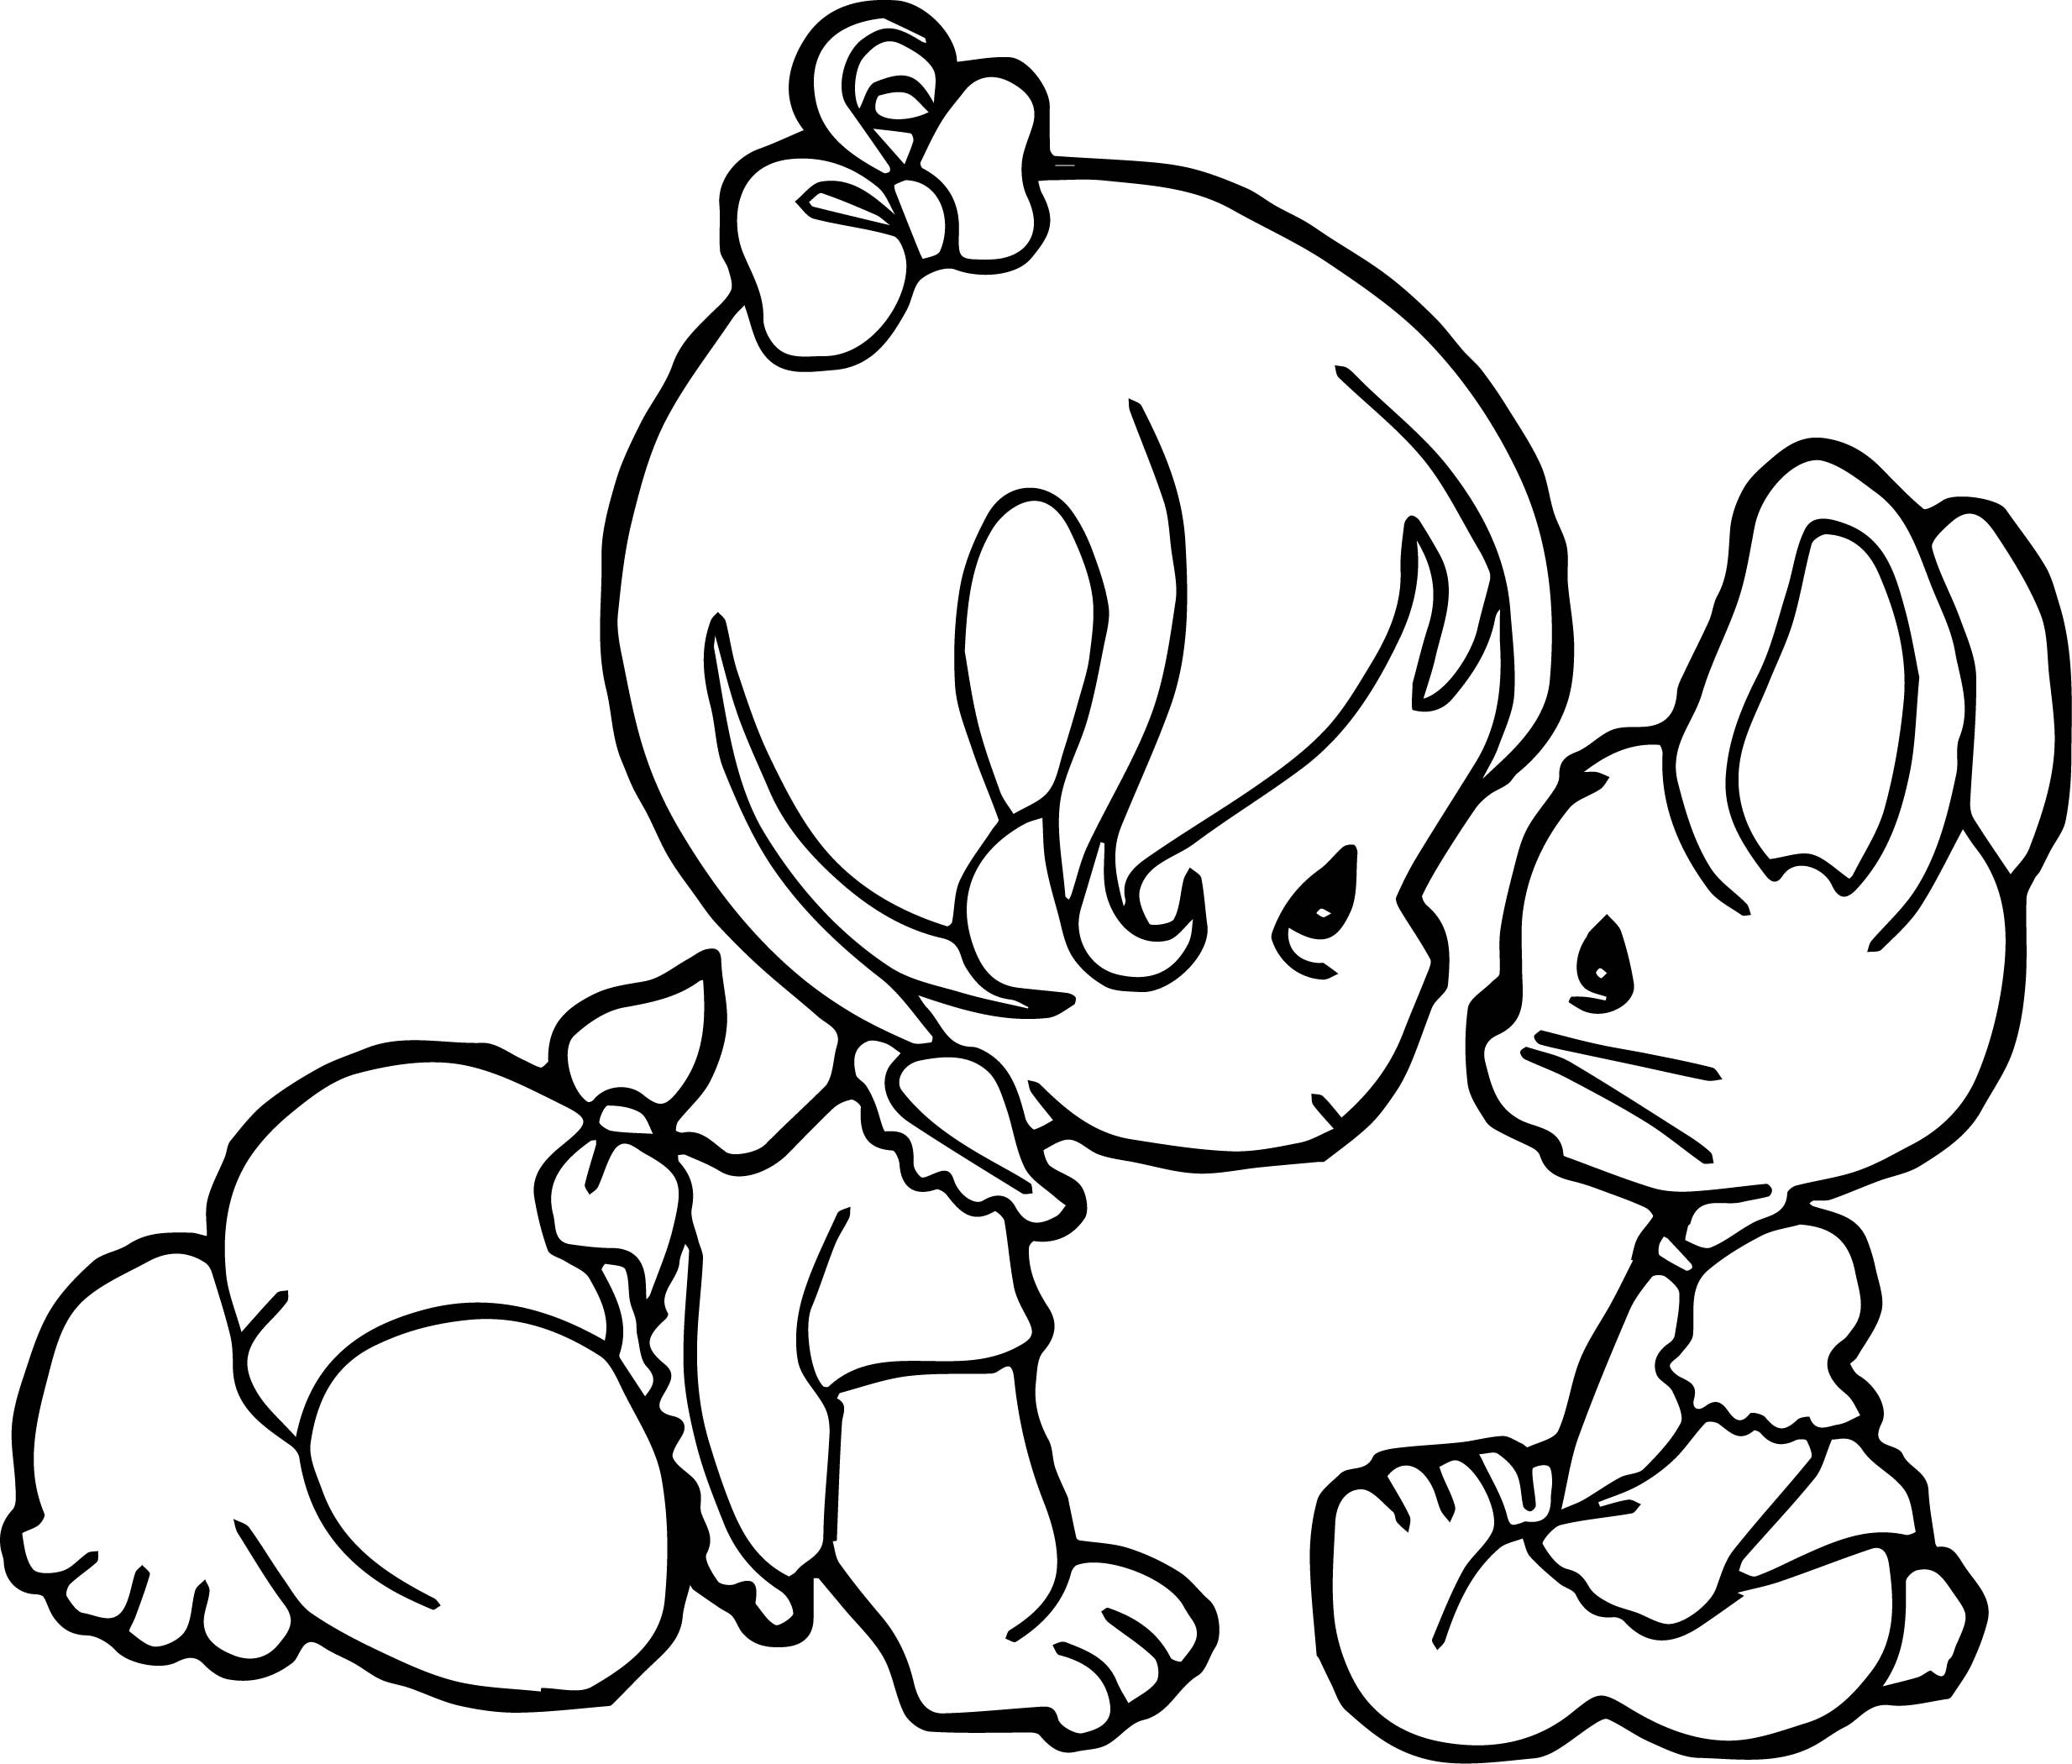 Baby Rabbit Coloring Pages
 Bunny Coloring Pages